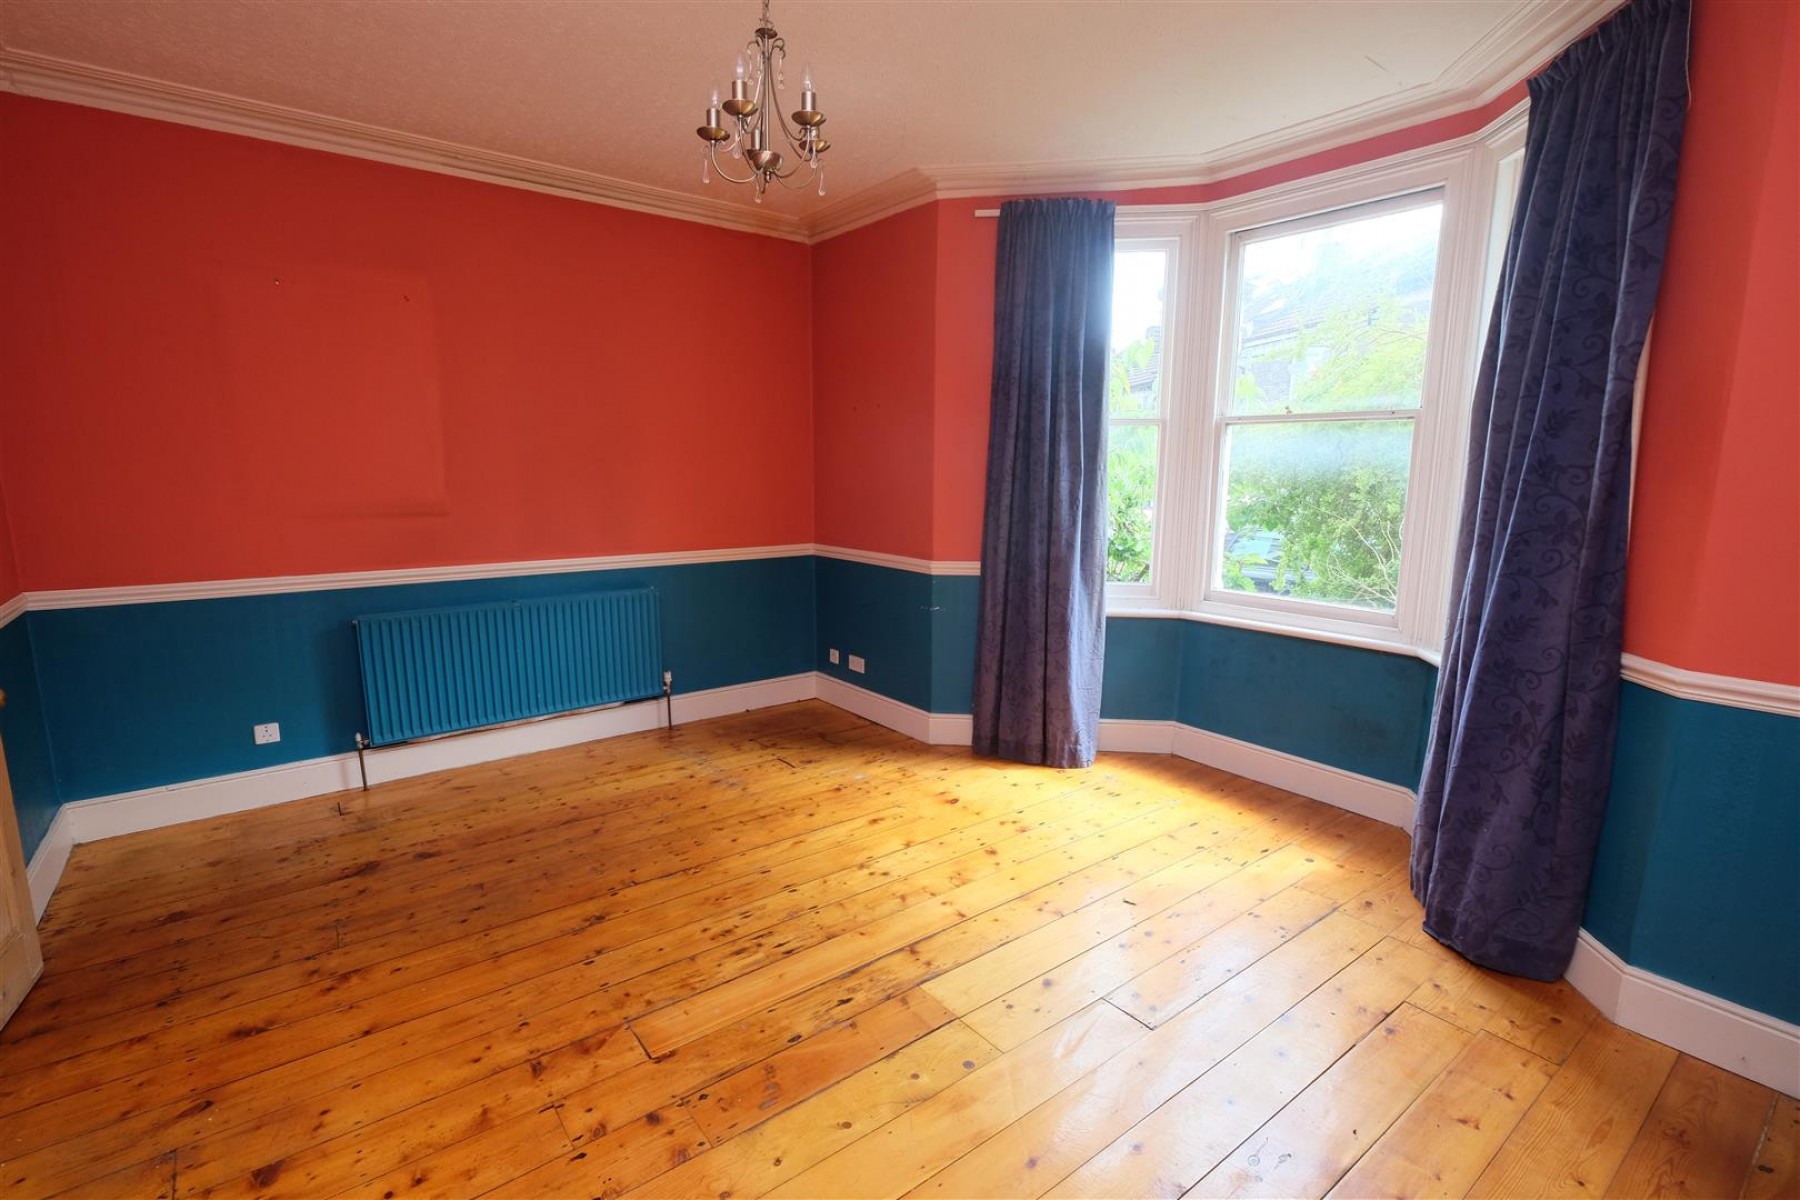 Images for HOUSE FOR UPDATING | BISHOPSTON